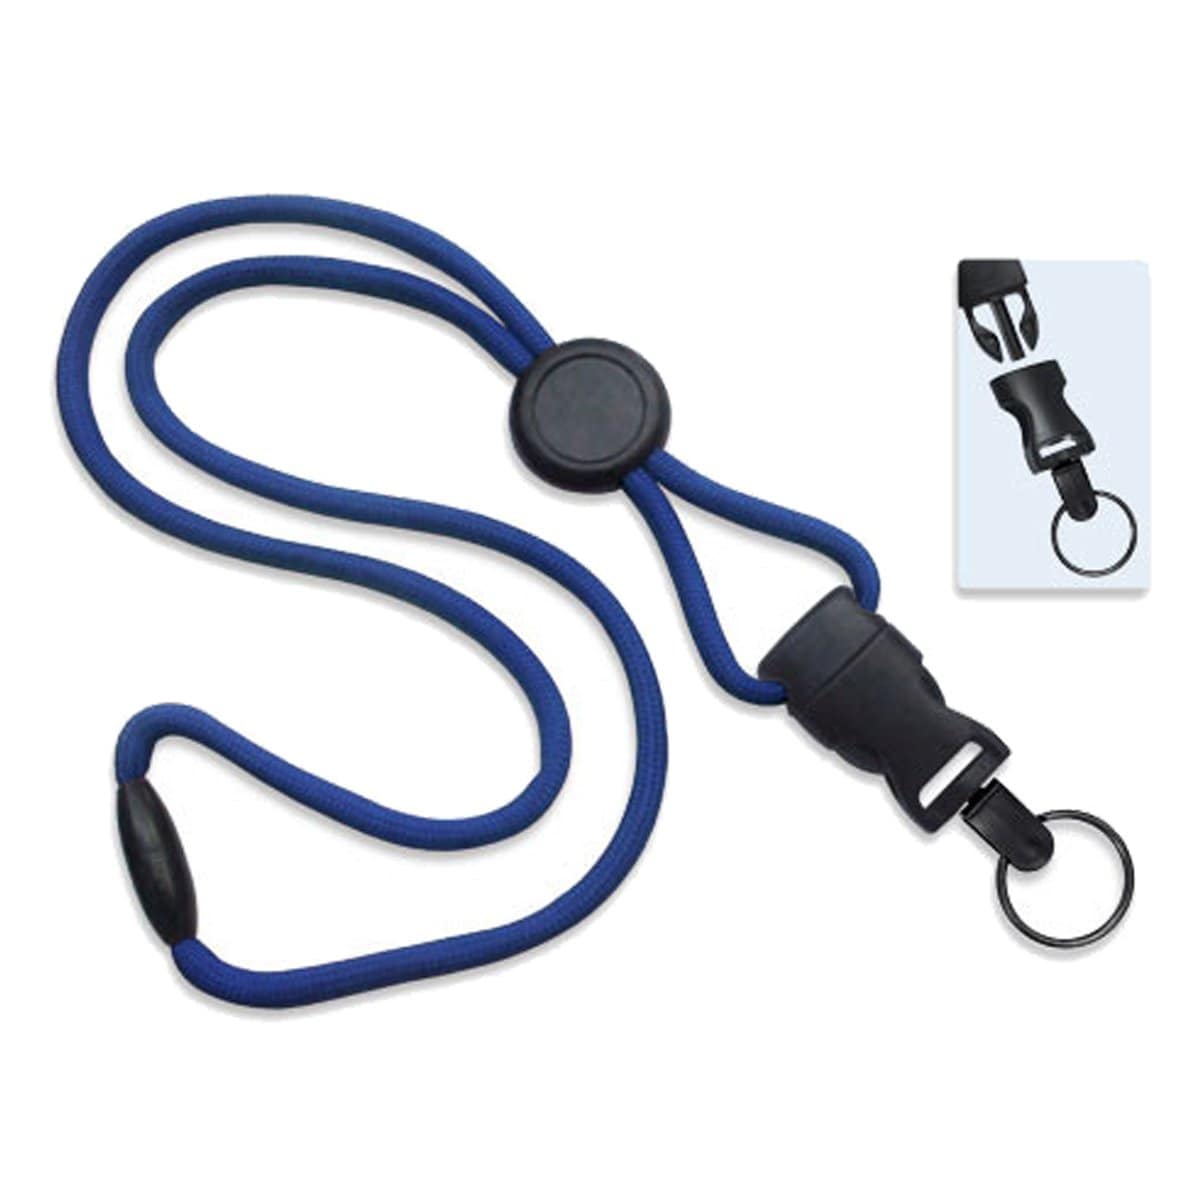 A Breakaway Lanyard with Round Slider And Detachable Key Ring 2135-461X offers safety features for added security. An inset image shows a close-up of the clip mechanism, highlighting its reliability.